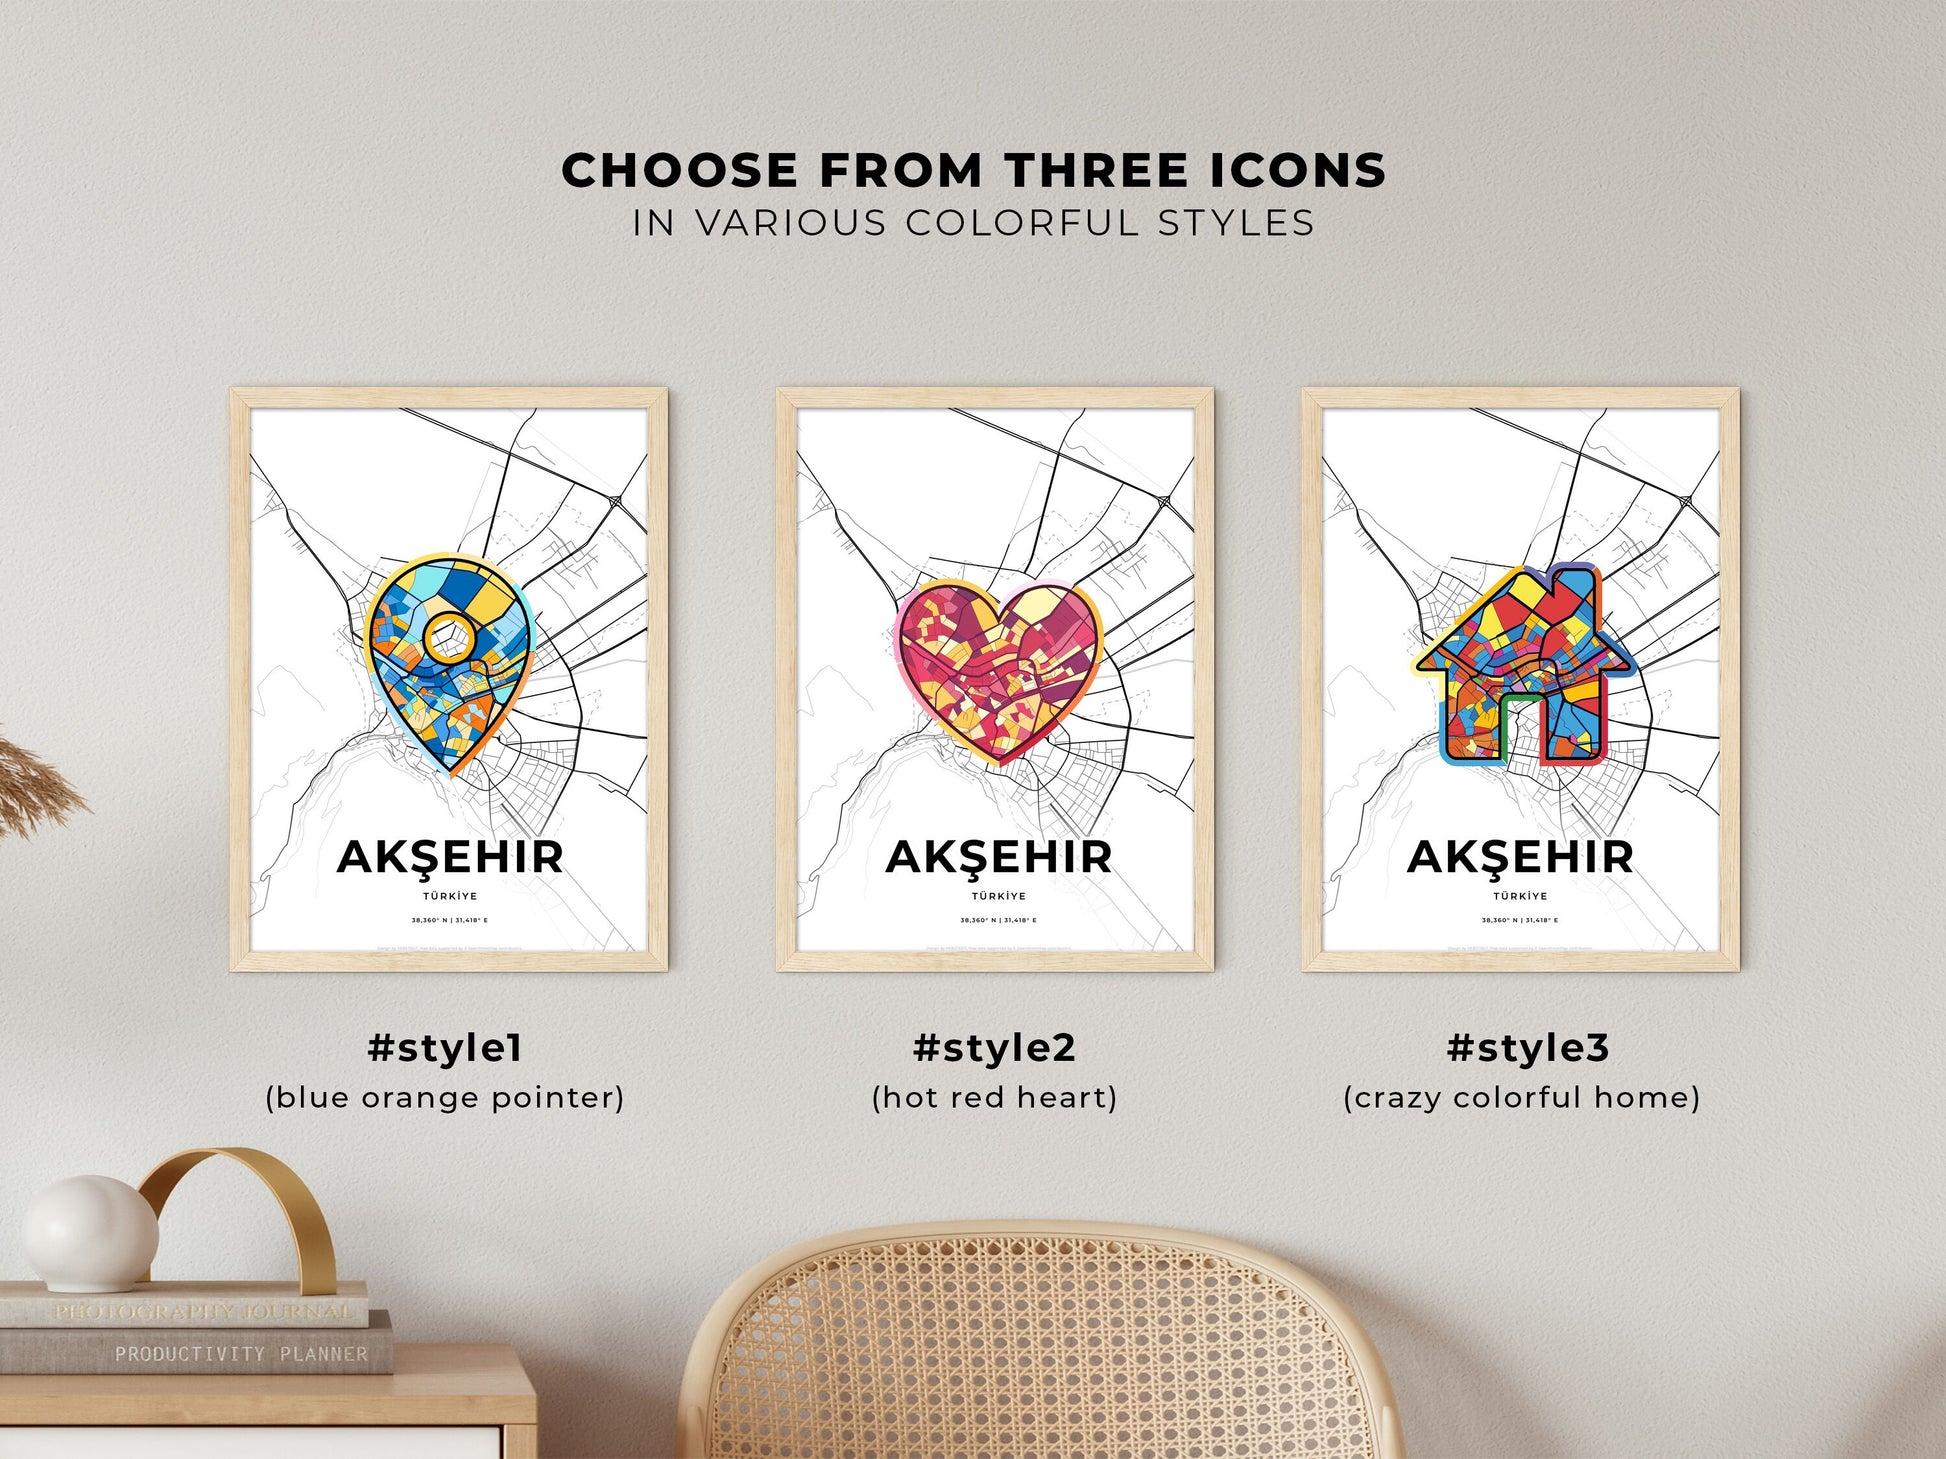 AKŞEHIR TURKEY minimal art map with a colorful icon. Where it all began, Couple map gift.